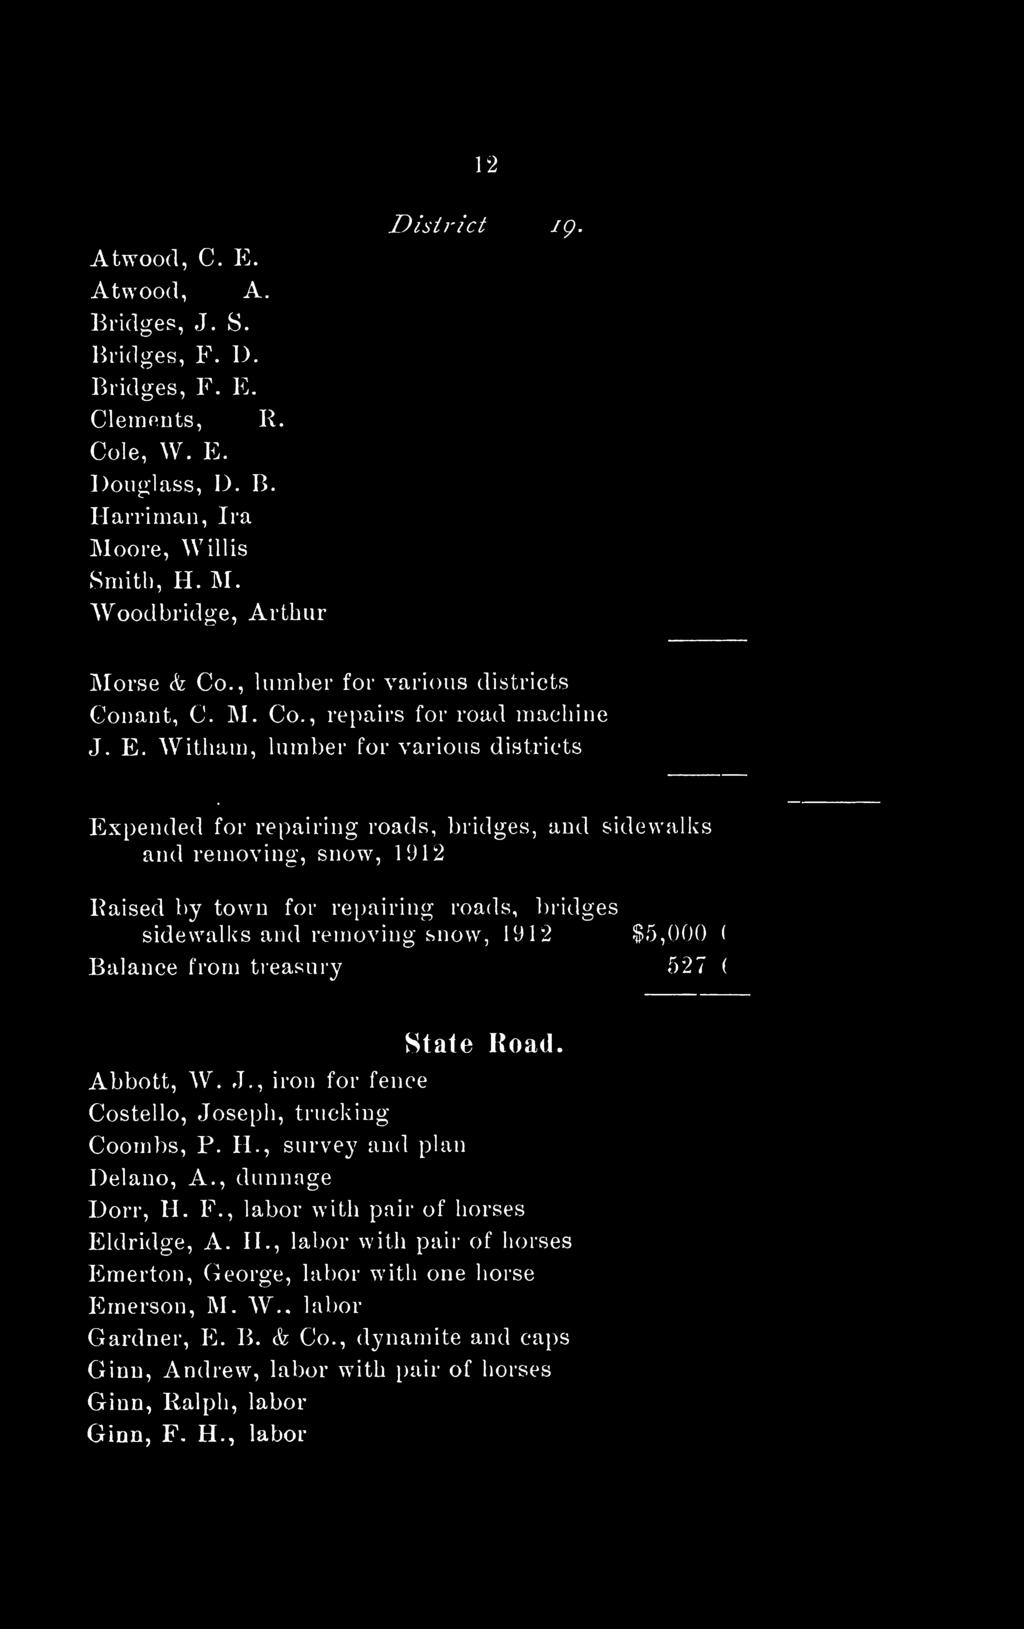 w itham, lumber for various districts Expended for repairing roads, bridges, and sidewalks and removing, snow, 1912 Raised by town for repairing roads, bridges sidewalks and removing snow, 1912